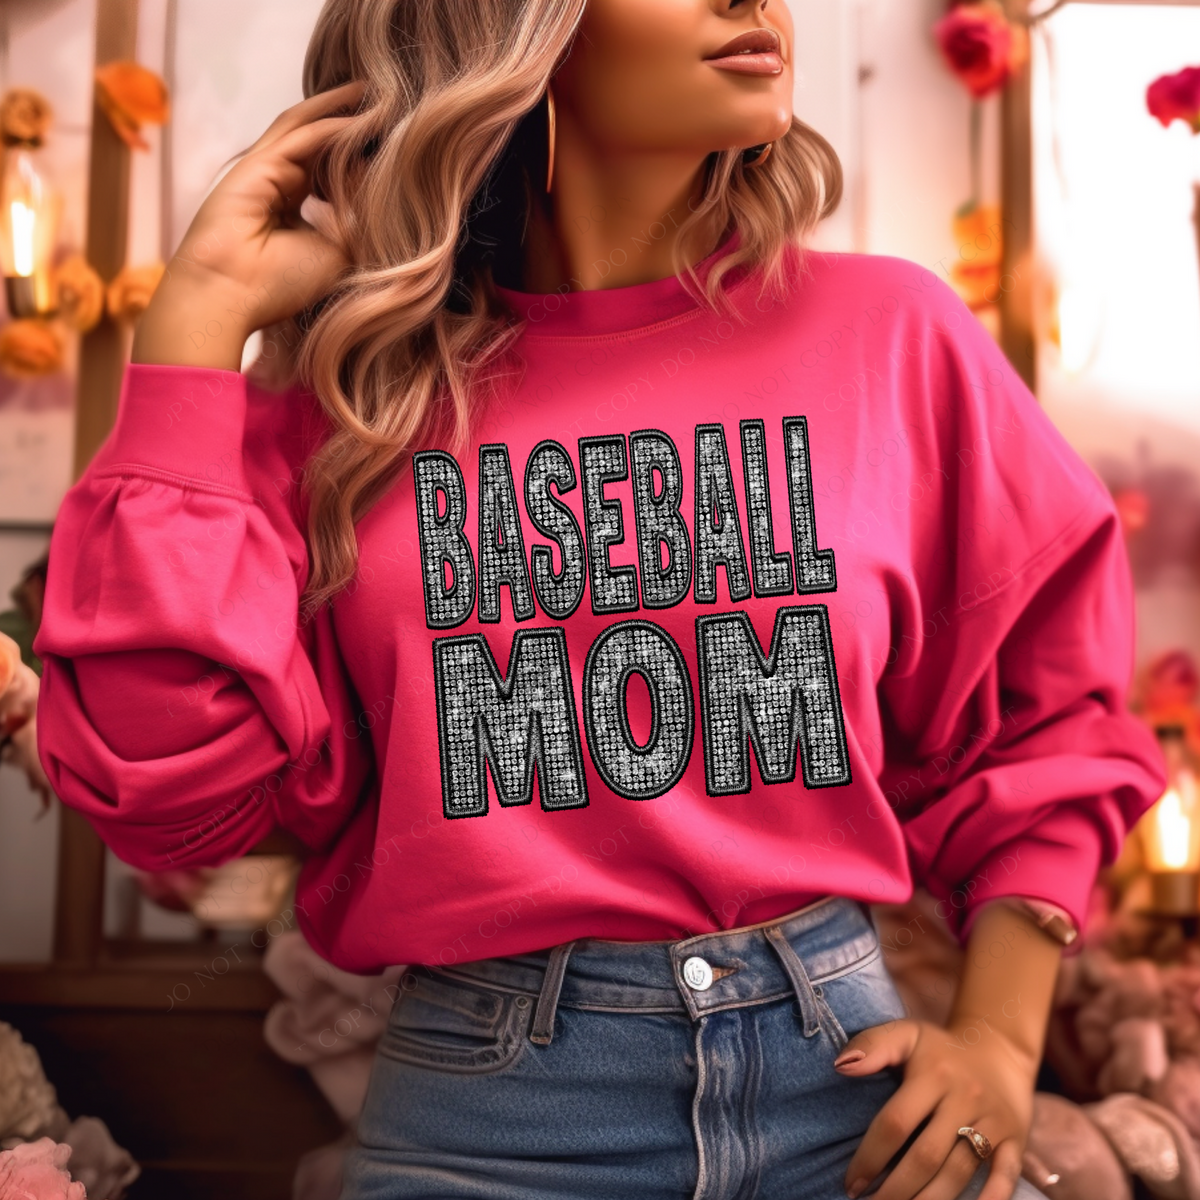 Baseball Mom Faux Embroidery Diamonds Bling in Black Digital Design, PNG